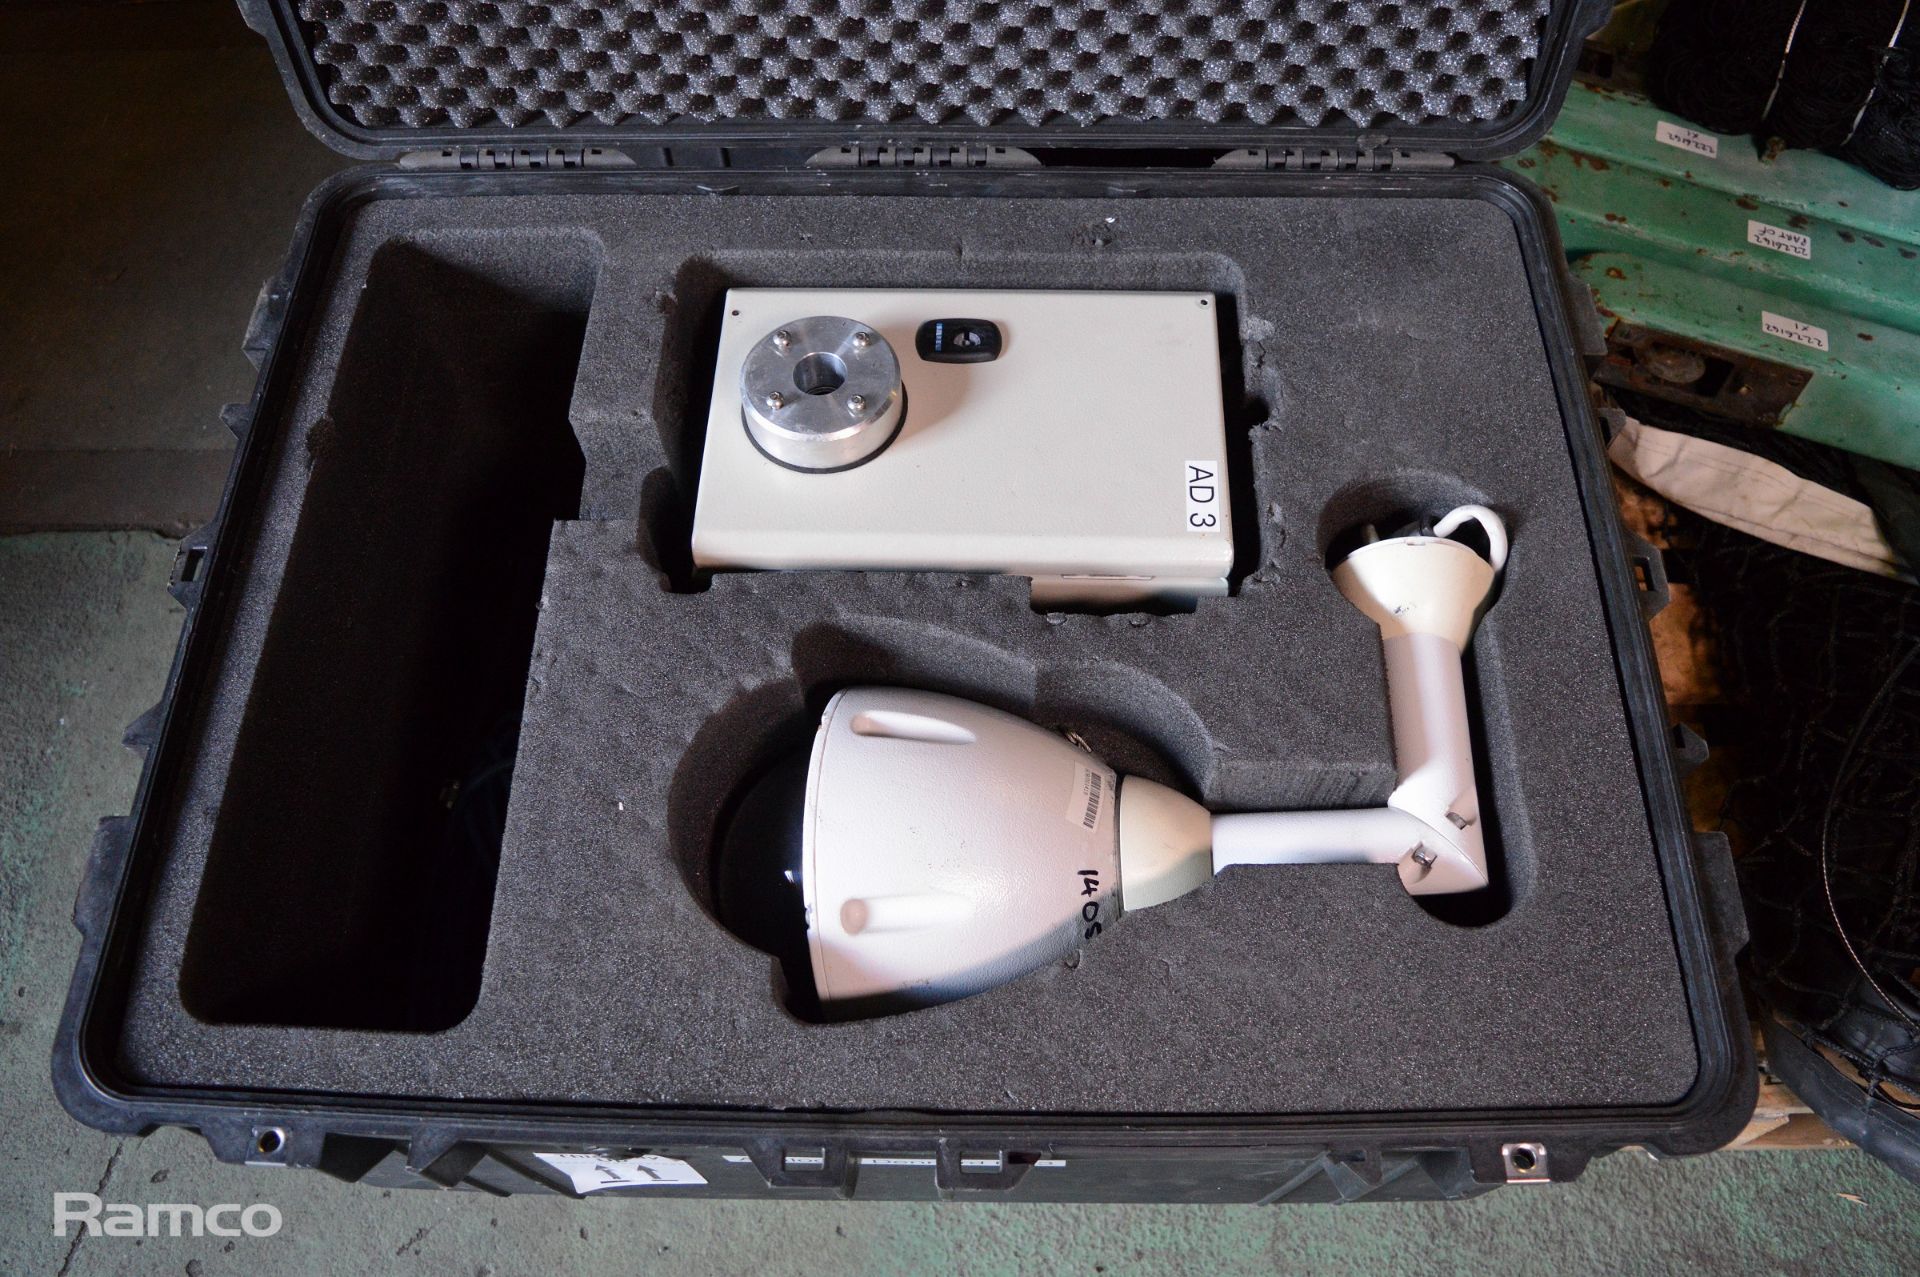 Dennard Analogue Dome Camera With Control Box & Case - Image 2 of 8